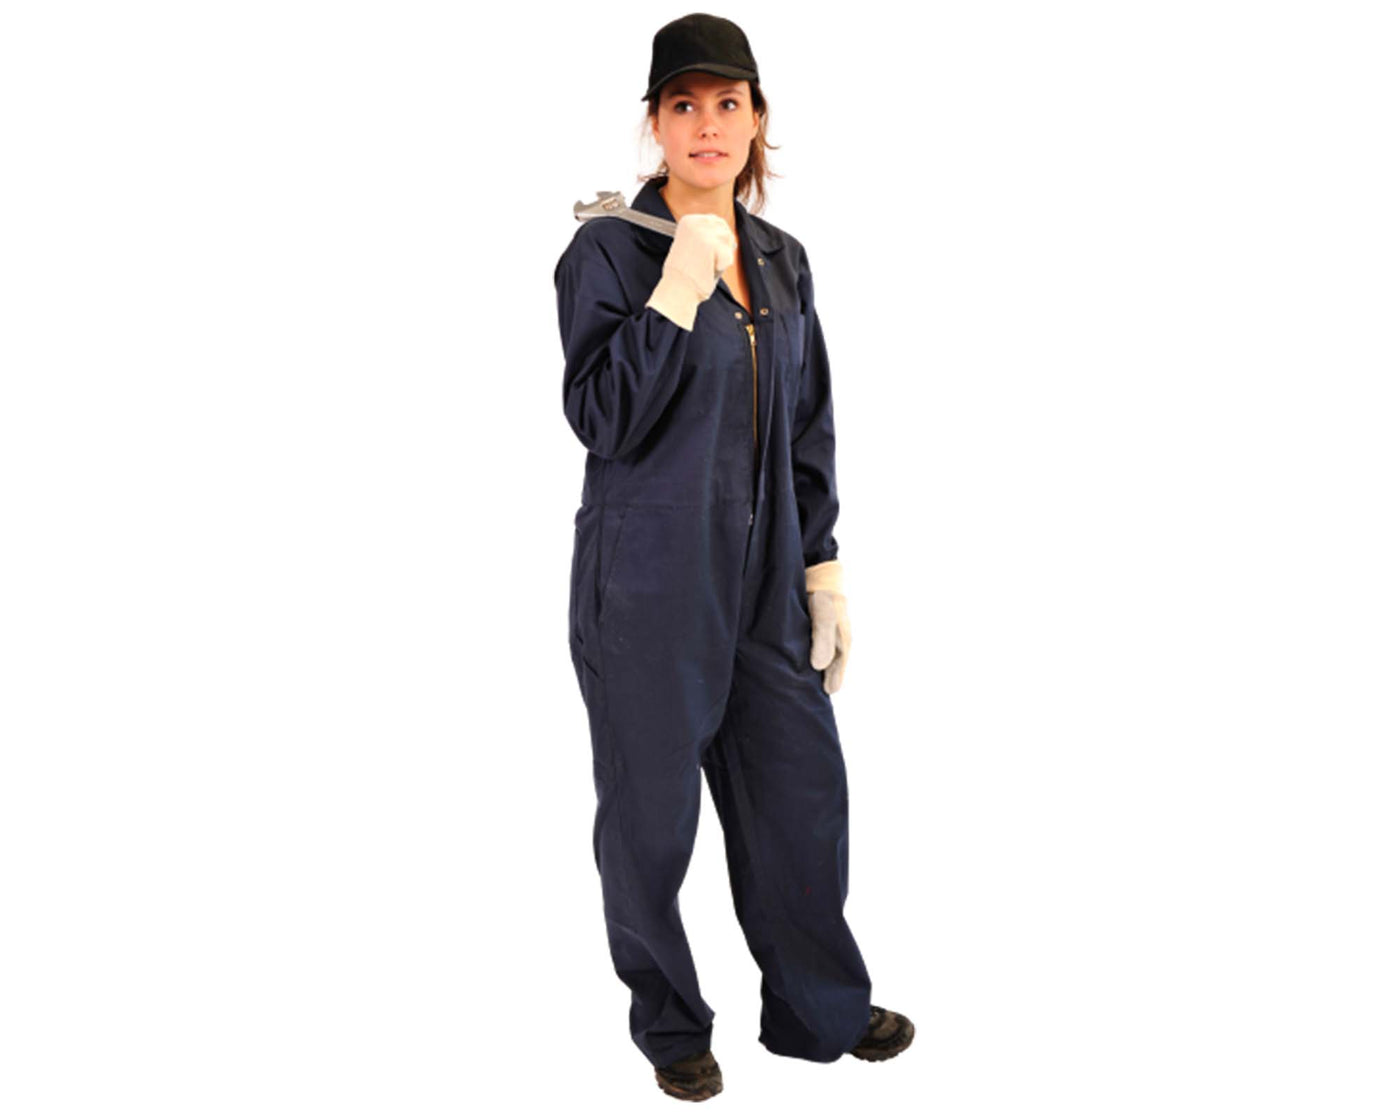 lady wearing  navy blue industrial coverall and wearing black baseball hat